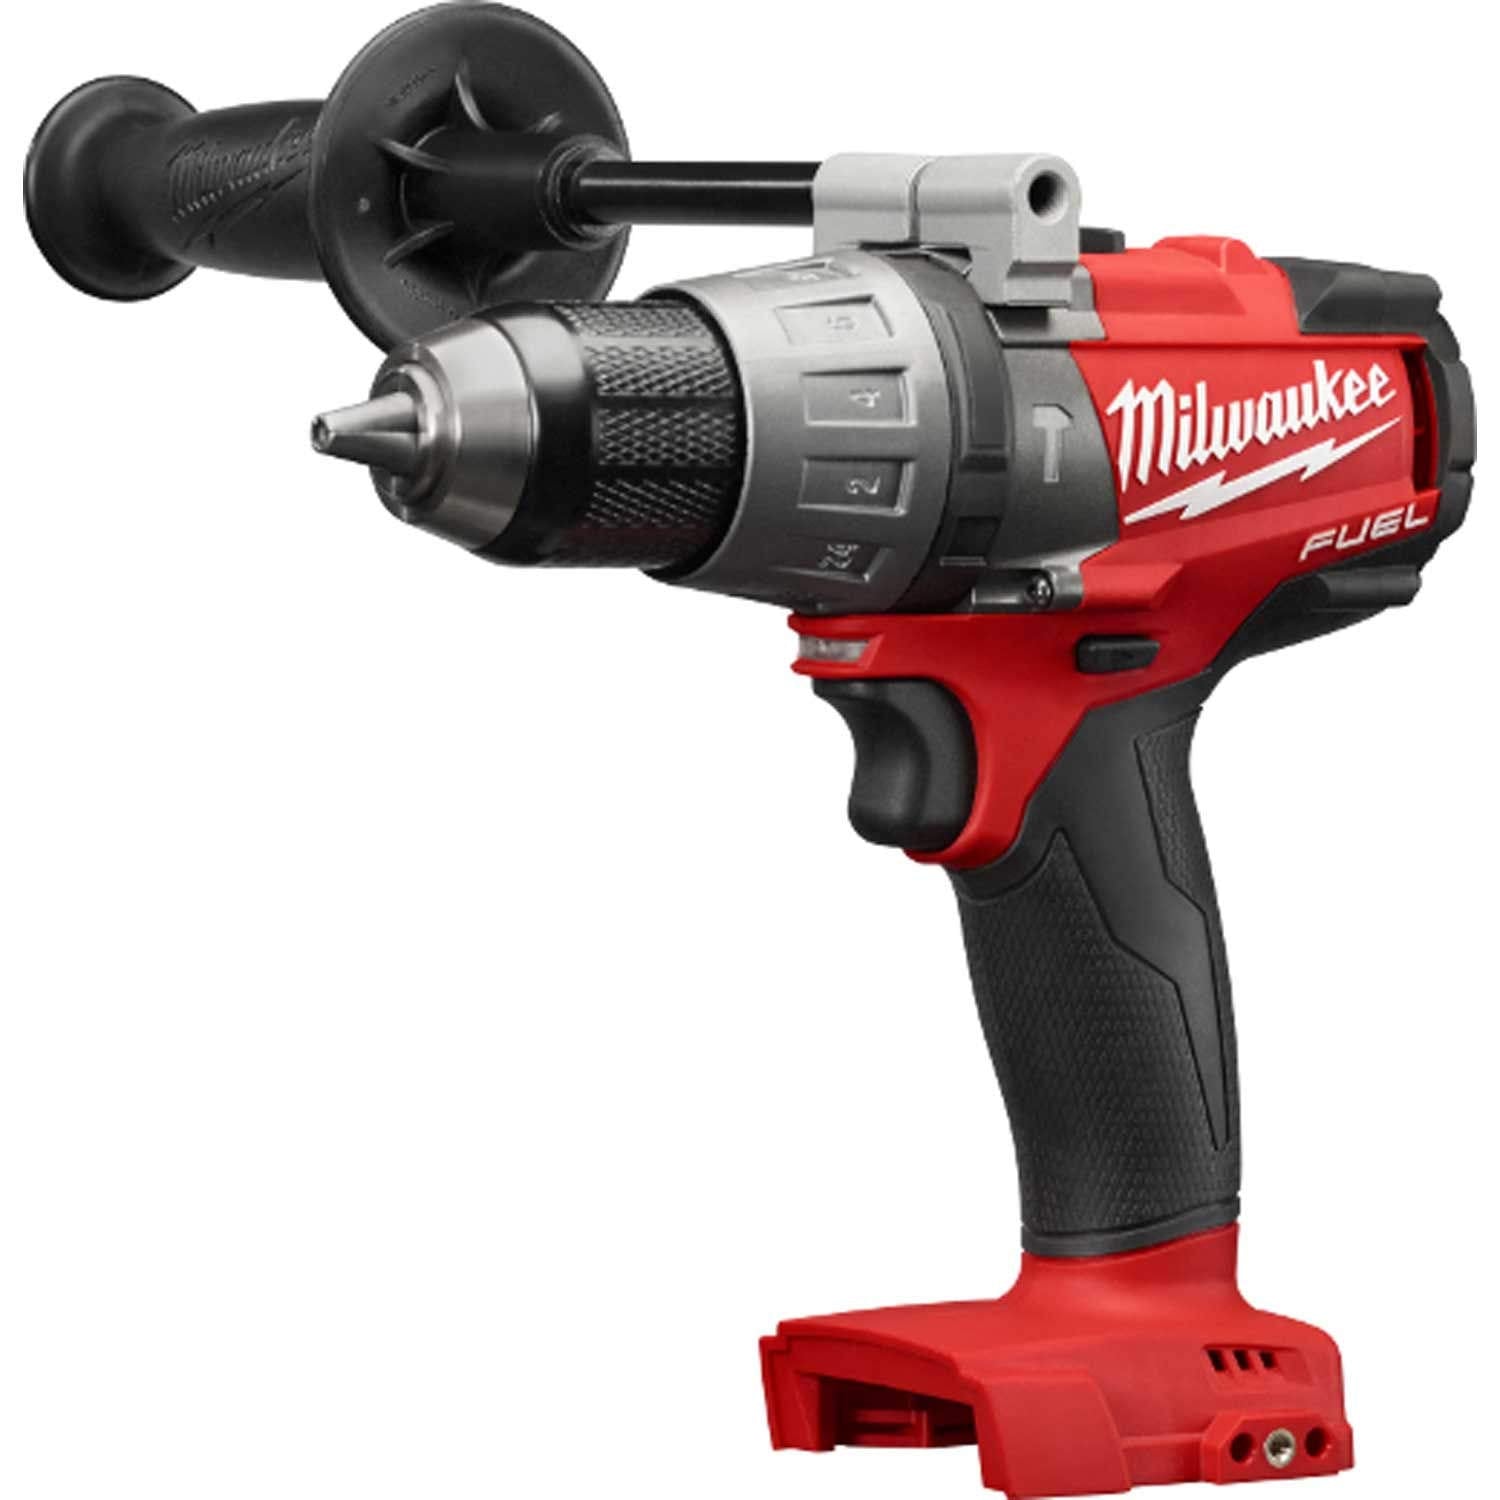 Milwaukee 2804-20 M18 FUEL 1/2 in. Hammer Drill (Tool Only) Tool-Peak Torque = 1,200 (7658642702574)